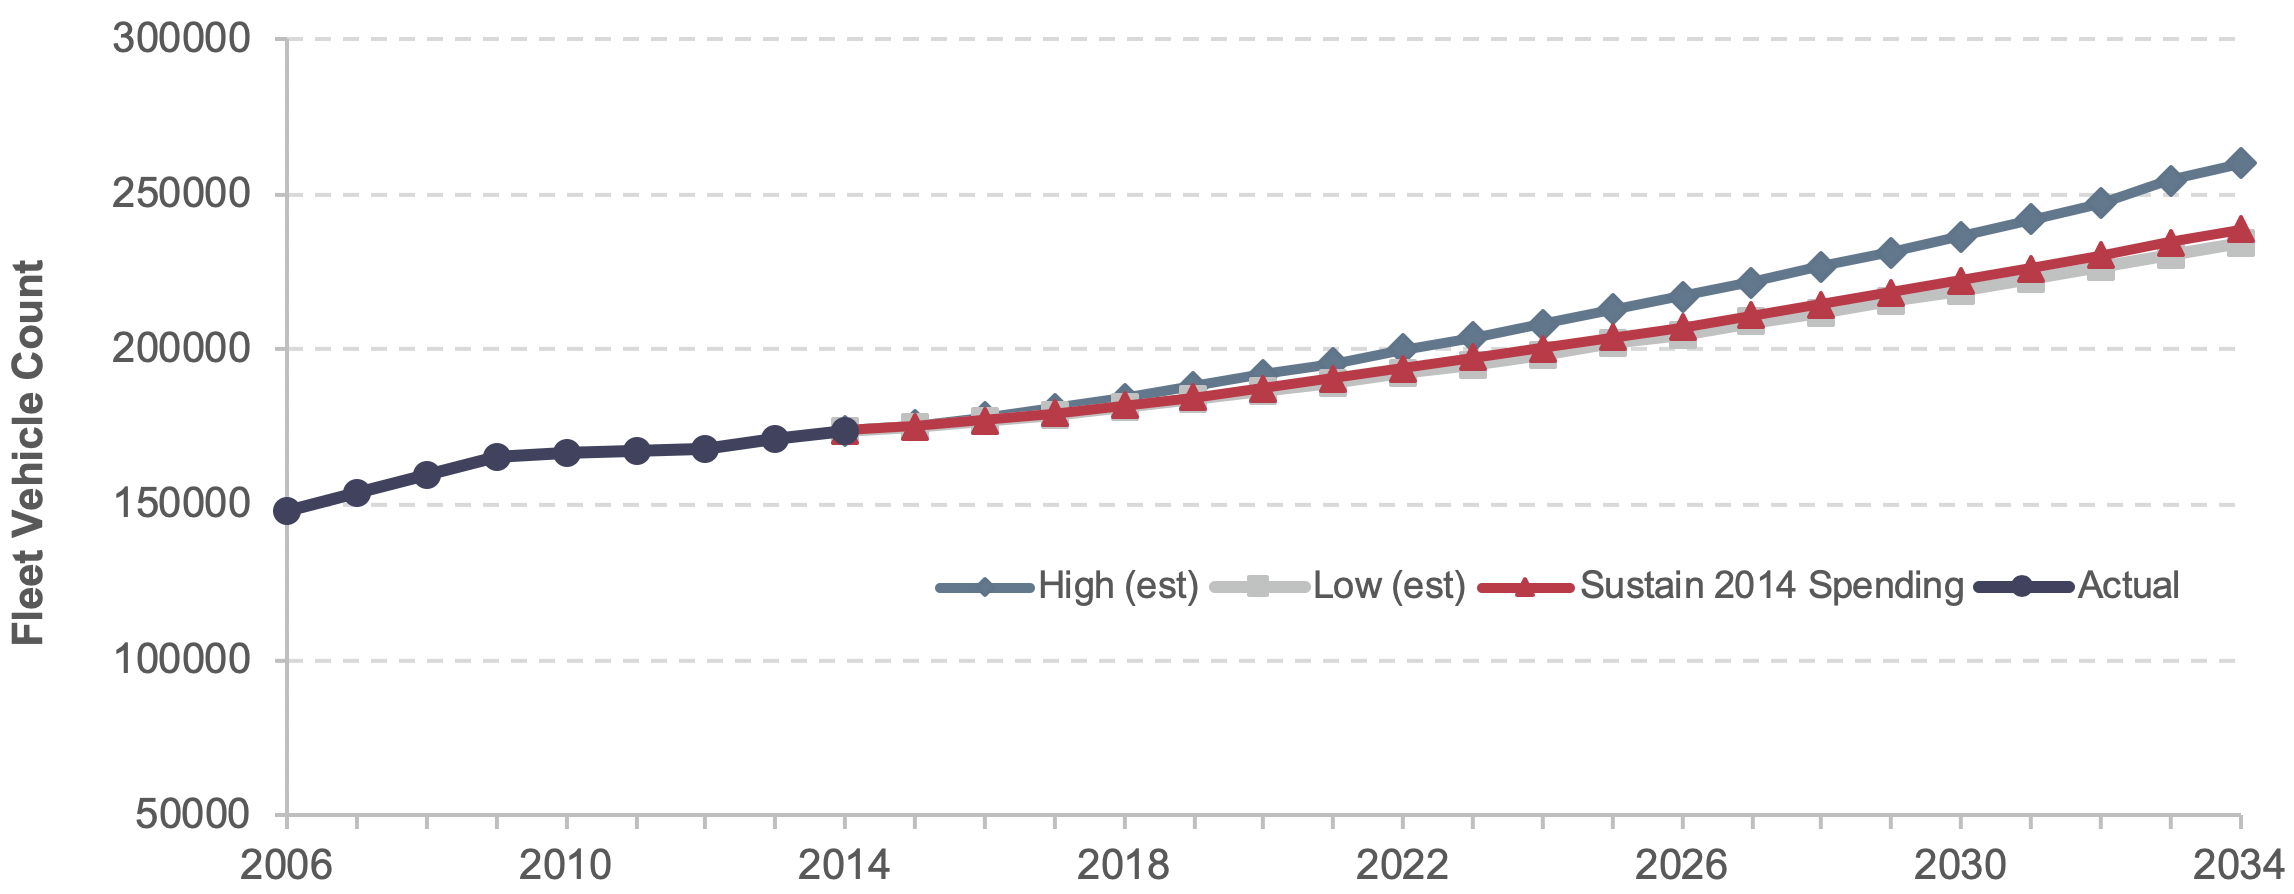 A line graph plots values for fleet vehicle count over time from 2006 to 2034 for four scenarios. The plot for actual vehicle count extends from a value of 147,964 in the year 2006 to a value of 173,958 in the year 2014. Remaining plots extend from this value. The plot for the high(est) growth scenario extends to a value of 259,871 in the year 2034. The plot for the low(est) growth scenario extends to the value 234,374 in the year 2034. The plot for the sustain 2014 spending scenario extends to a value of 238,760 in the year 2034. Source: Transit Economic Requirements Model.